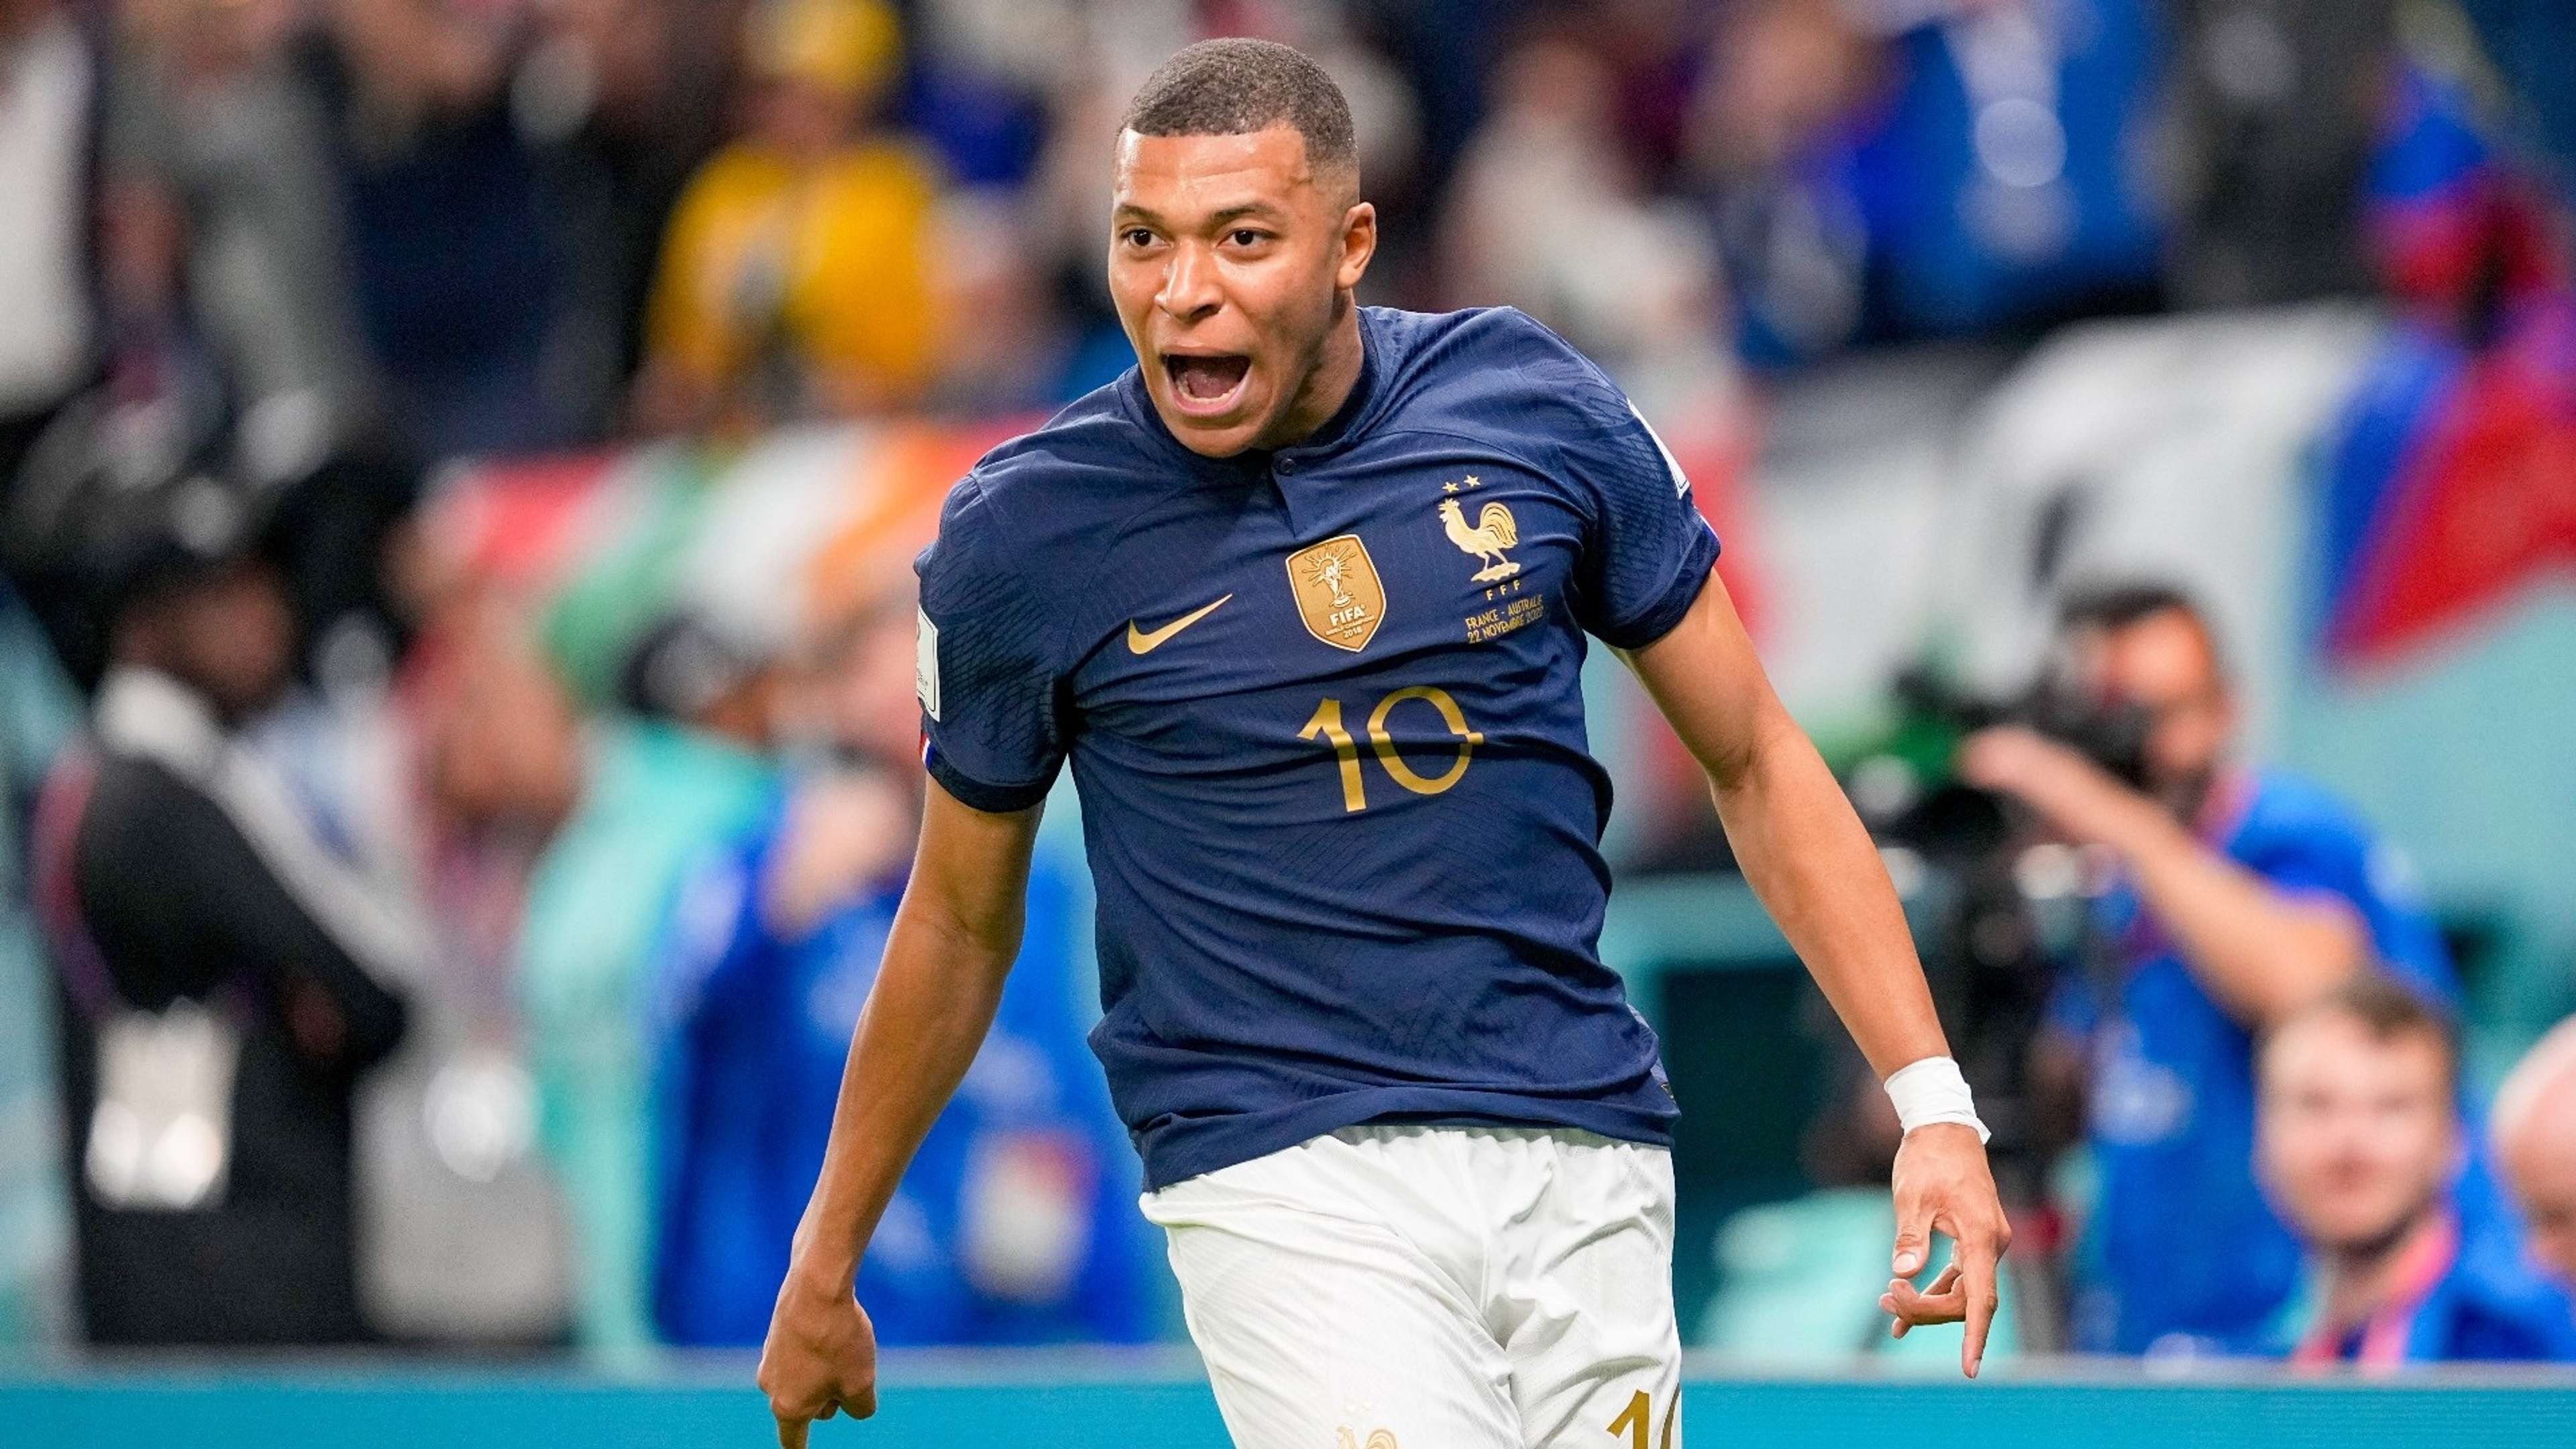 French Sports Minister Hopes Mbappe Will Play At 2024 Olympics In Paris